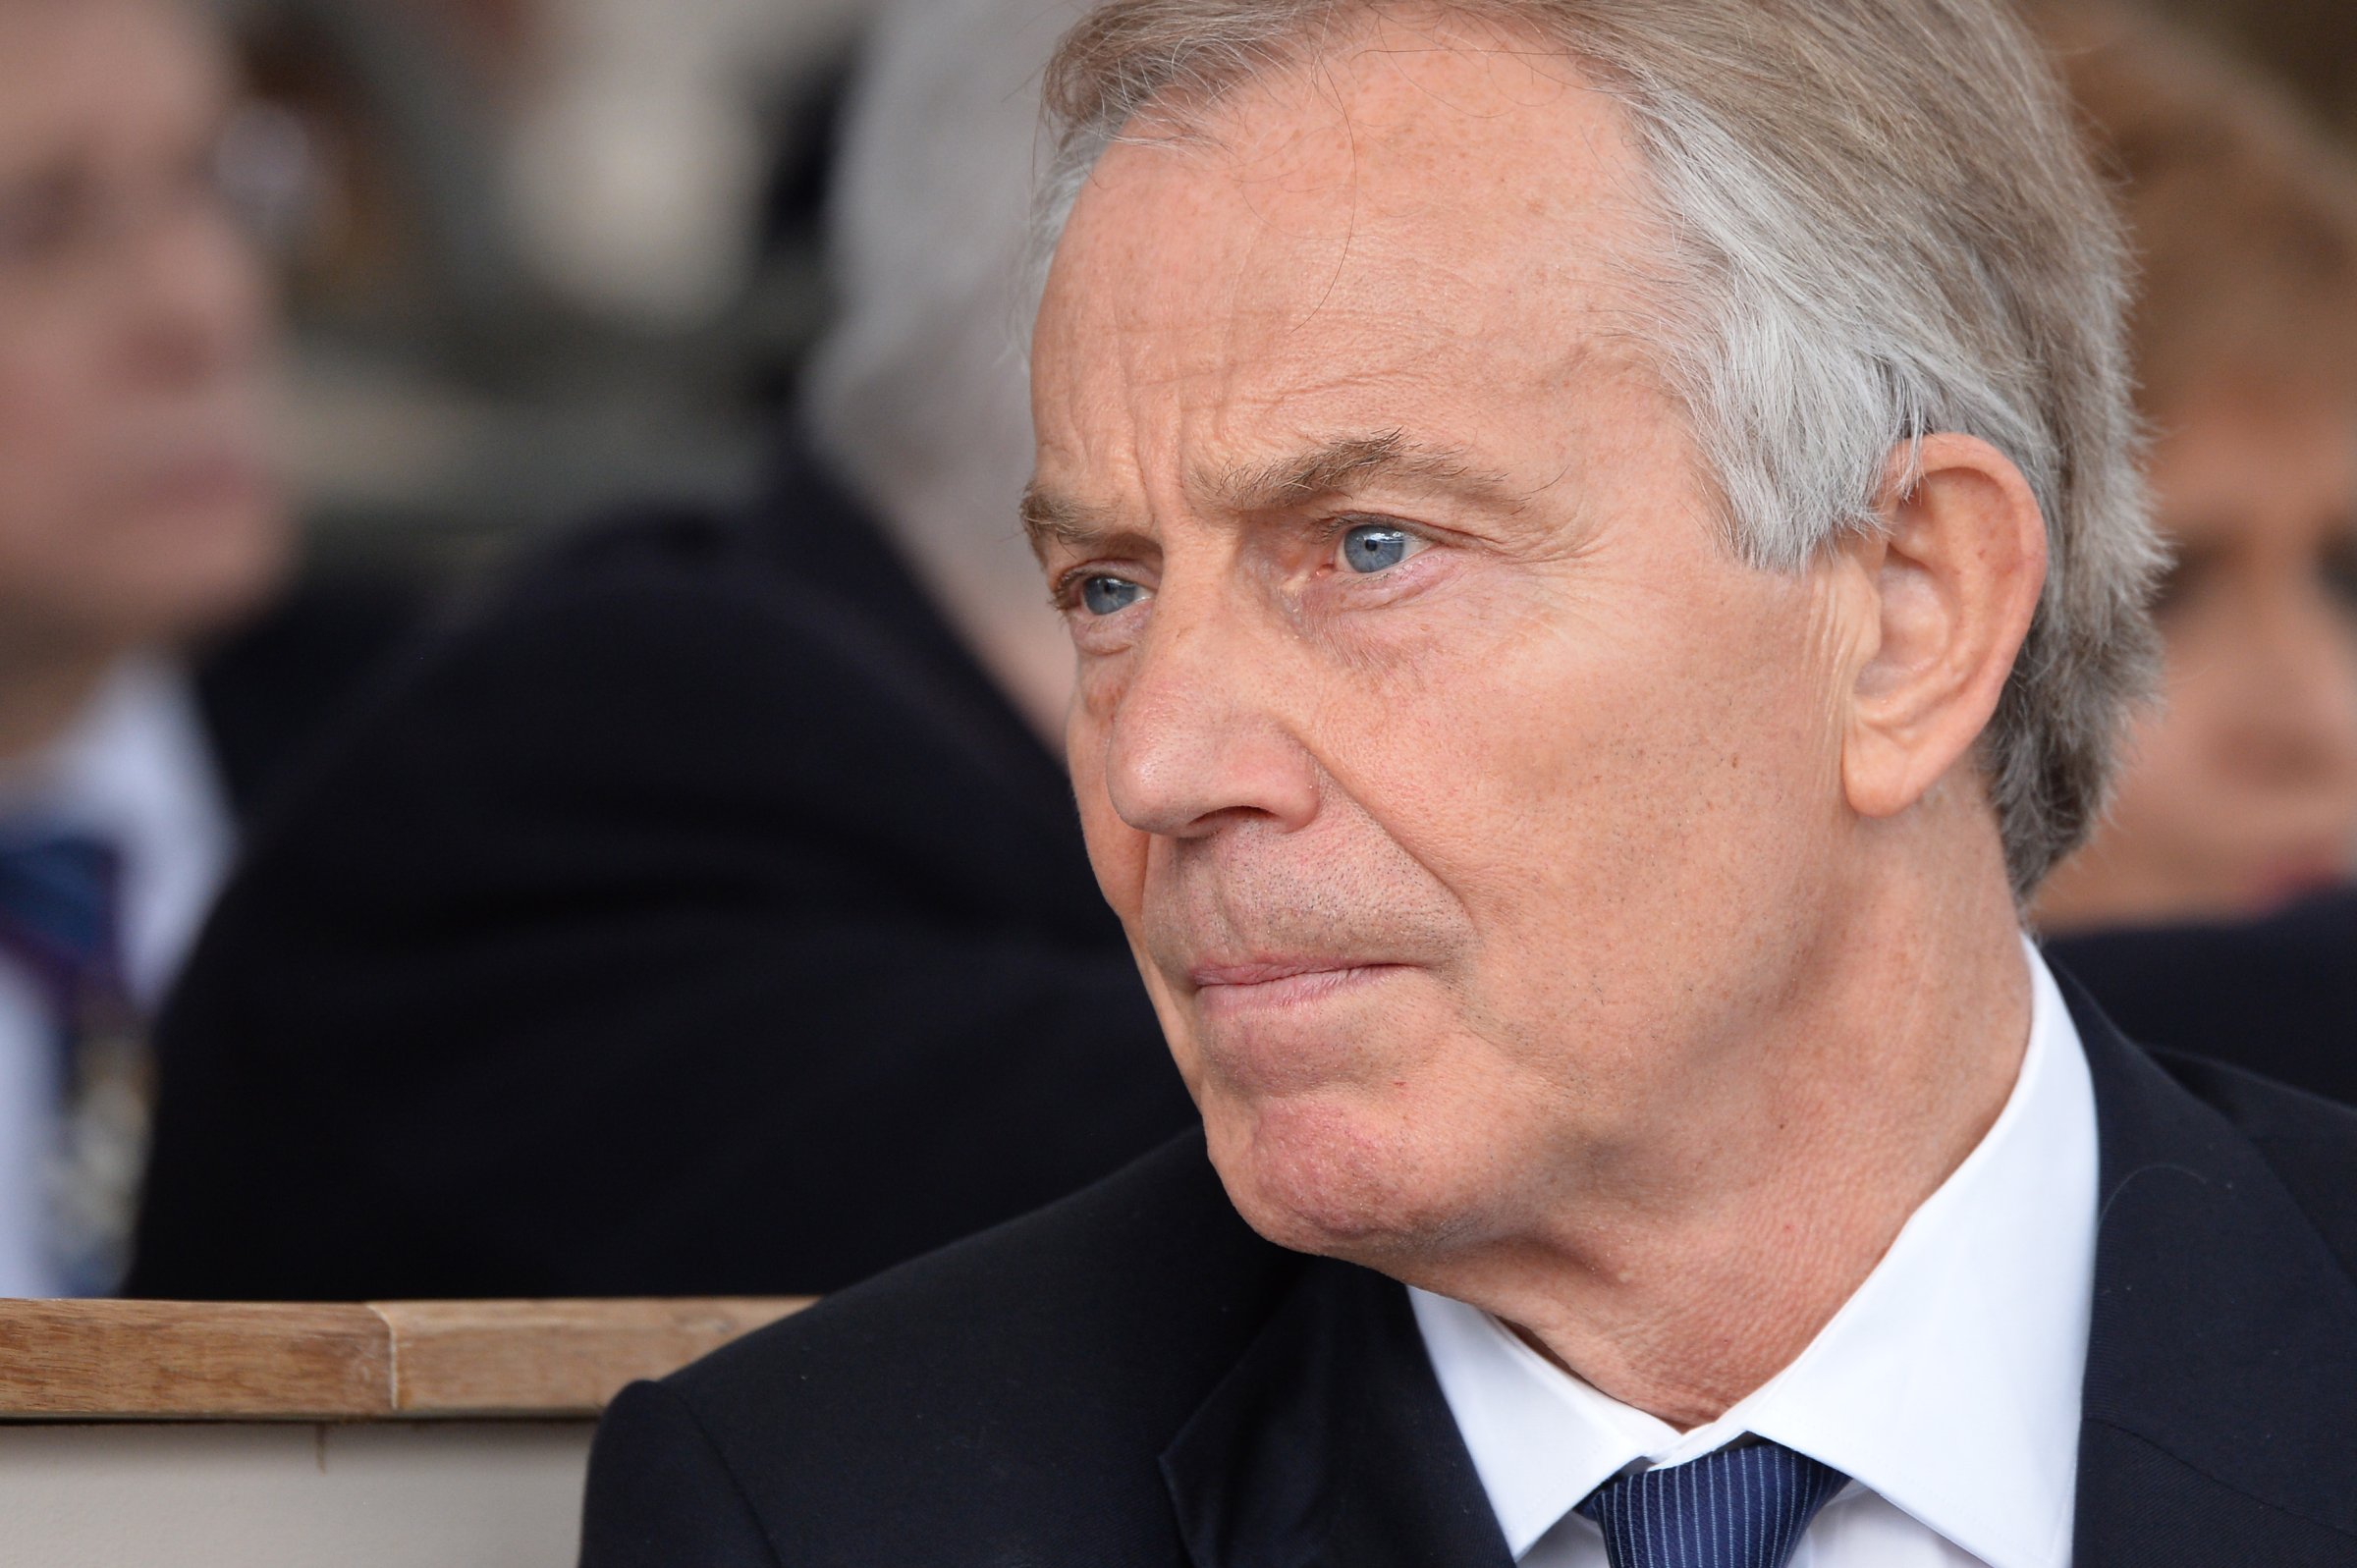 Tony Blair during the dedication and unveiling of The Iraq and Afghanistan memorial on March 9, 2017 in London, England.